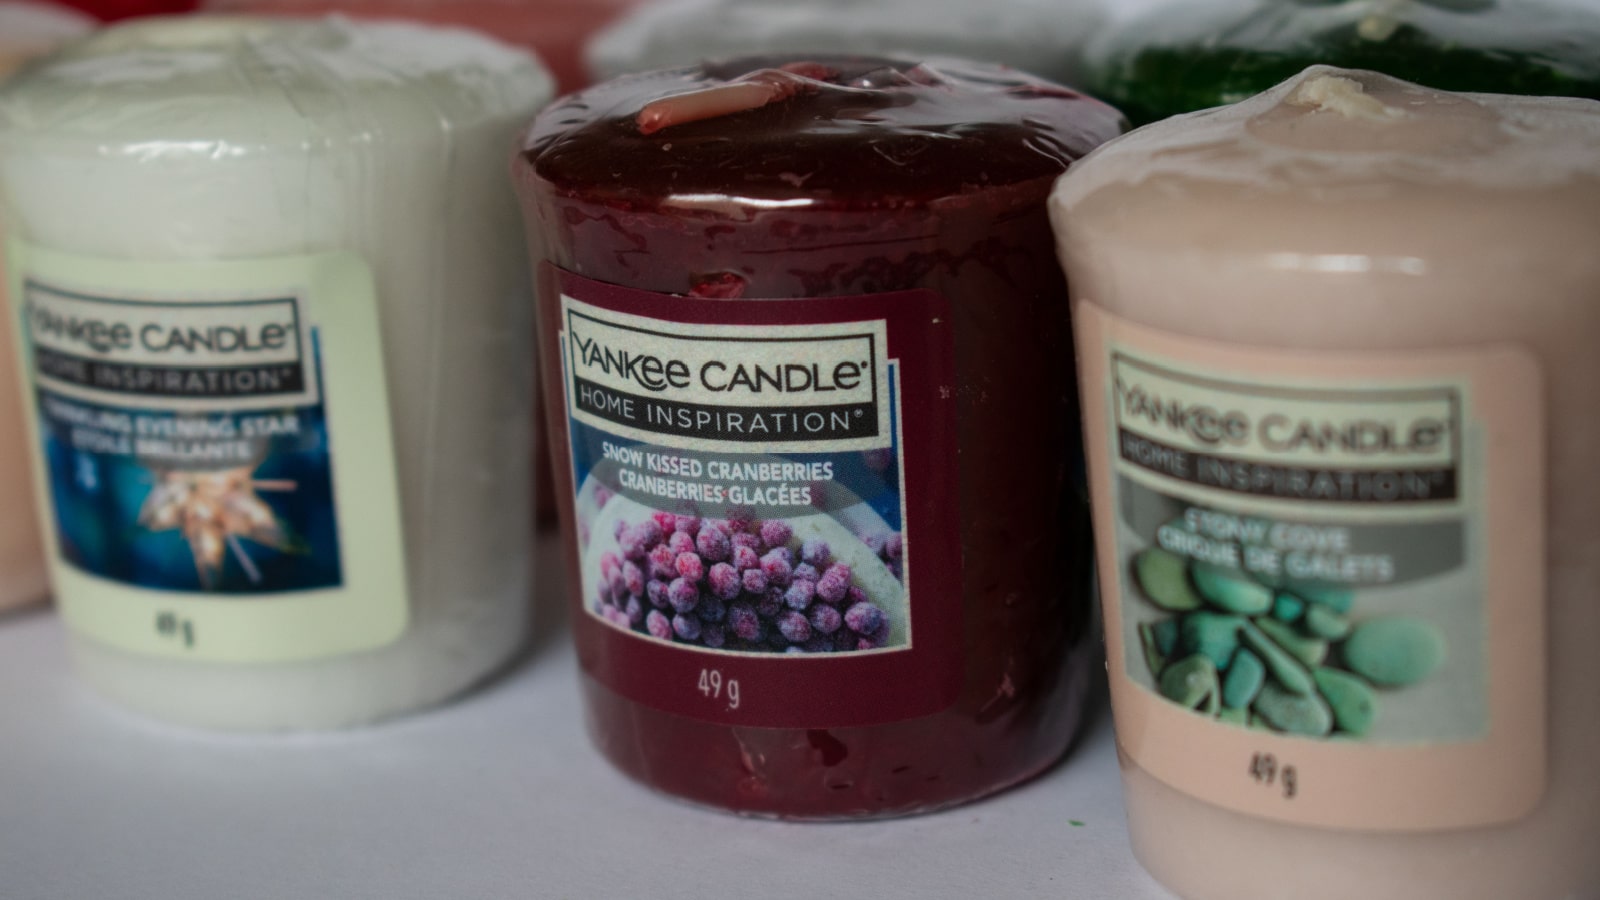 Penarth, Wales/United Kingdom - 03/08/2019: Yankee candles in different colors and scents